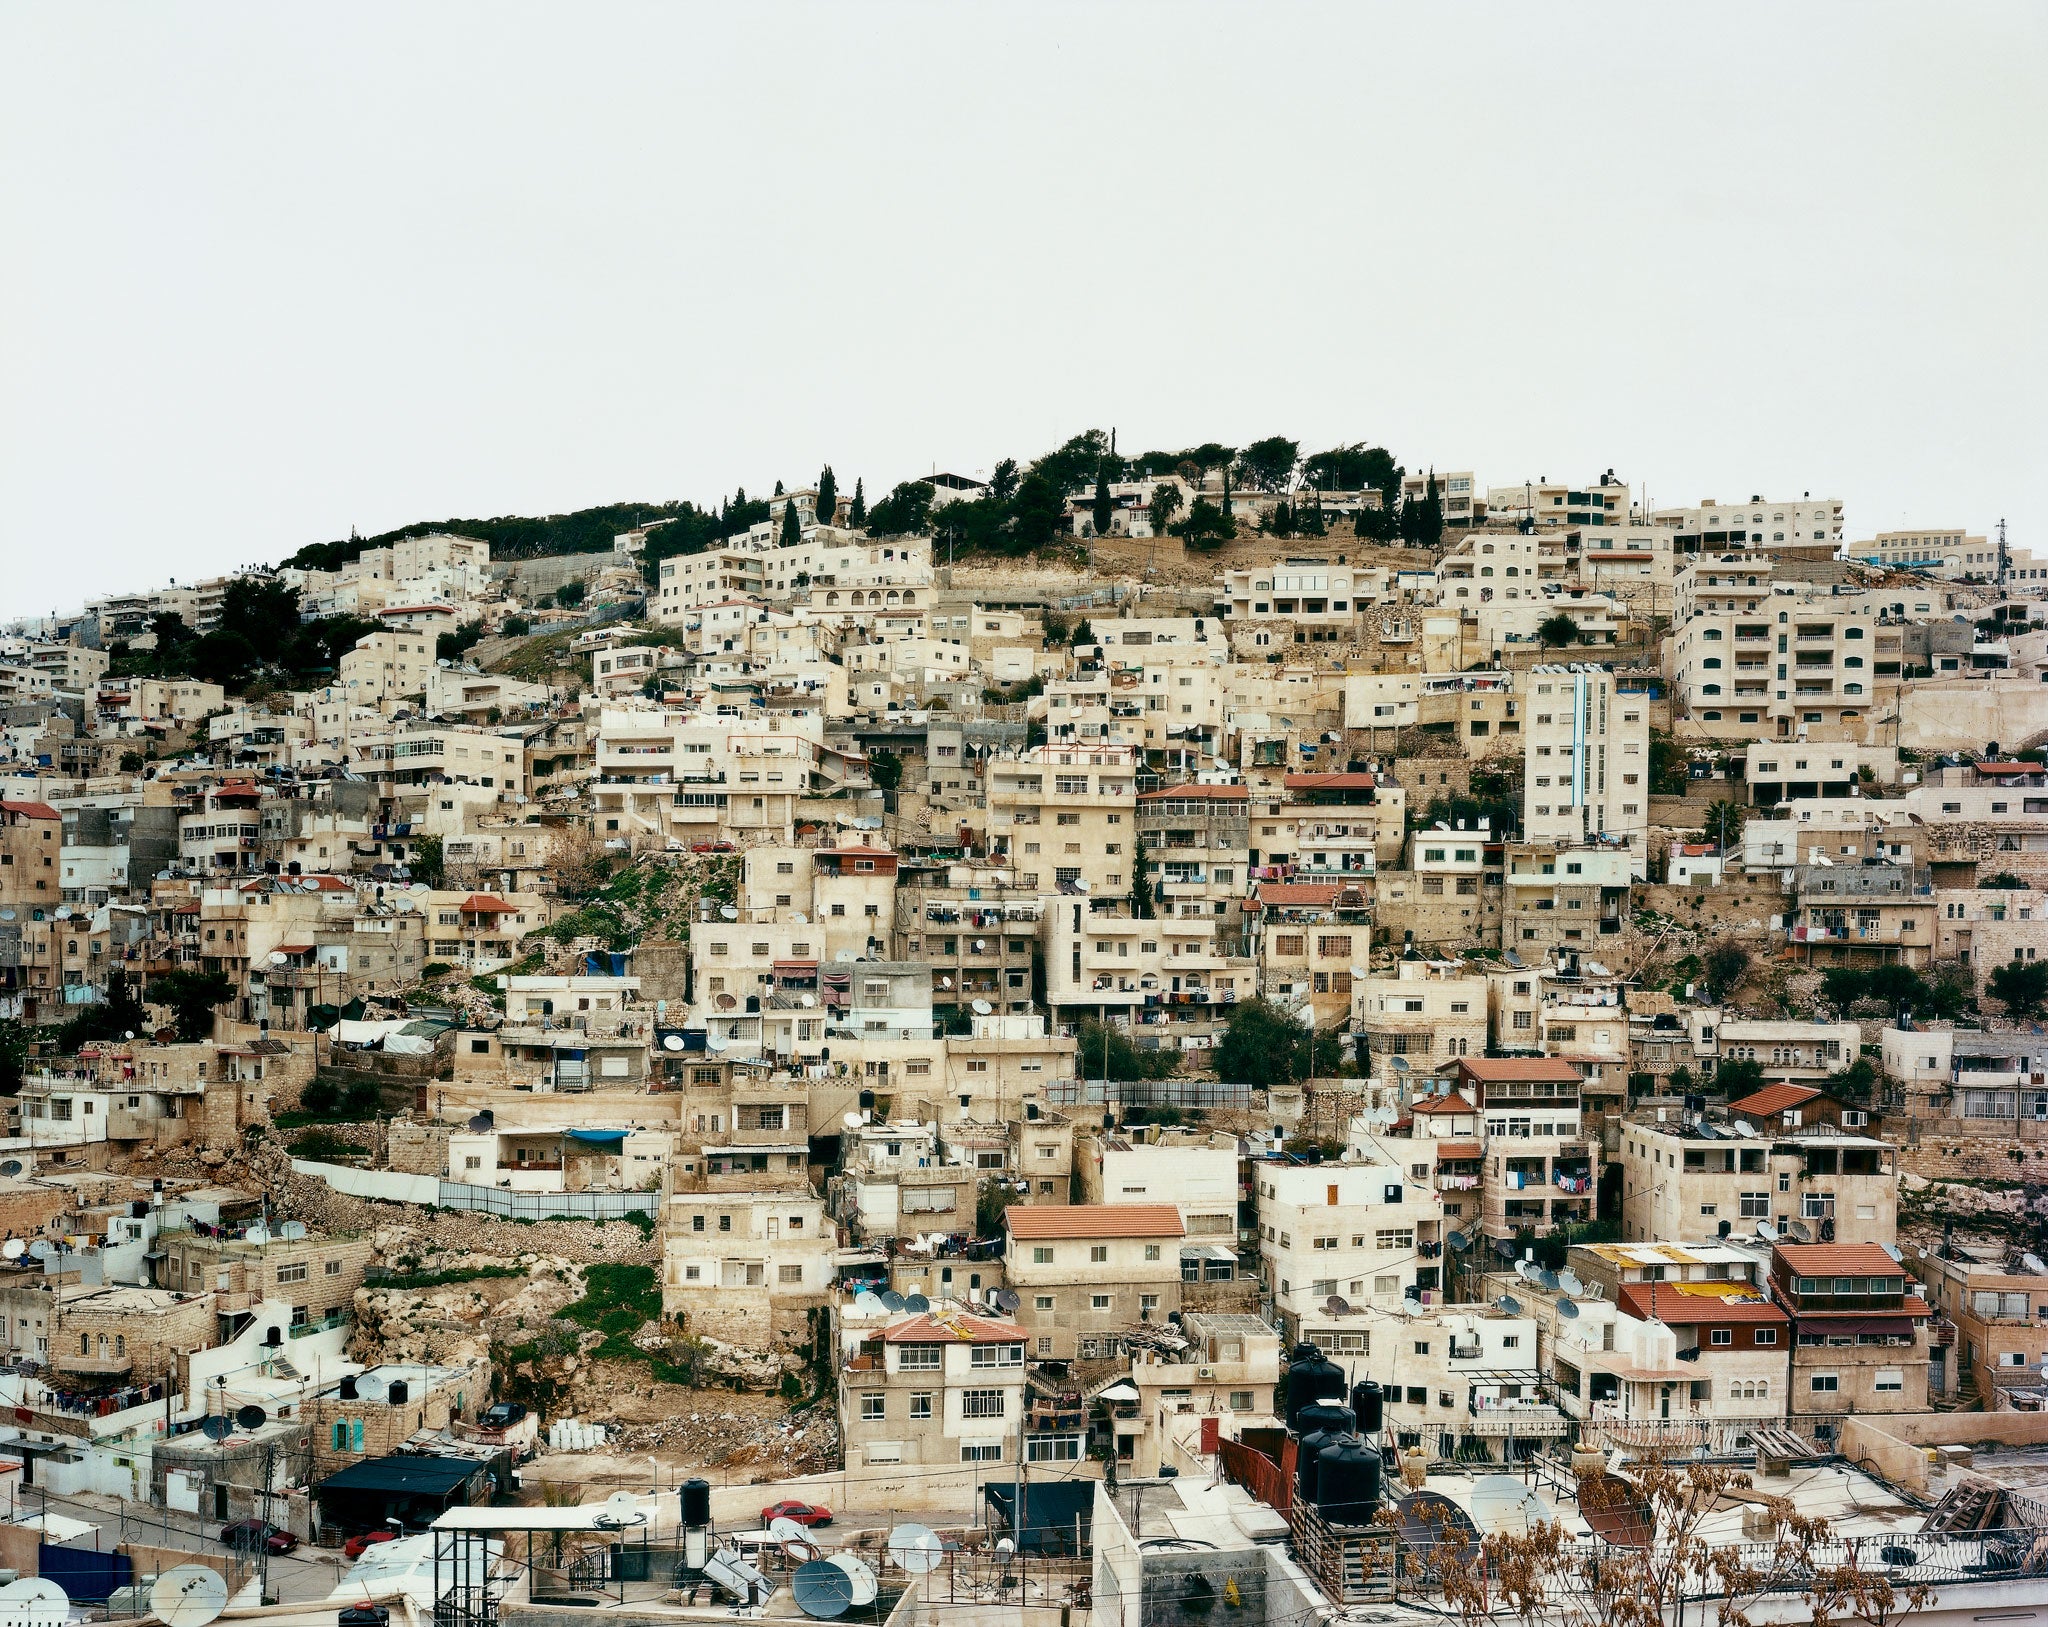 'A long Israeli flag hangs on a house called Beit Yonatan [the five-storey structure right of centre, halfway up], which is occupied by settlers. It is an illegal building in the Arab district of Silwan; the settler families in there are protected by the army and the police'